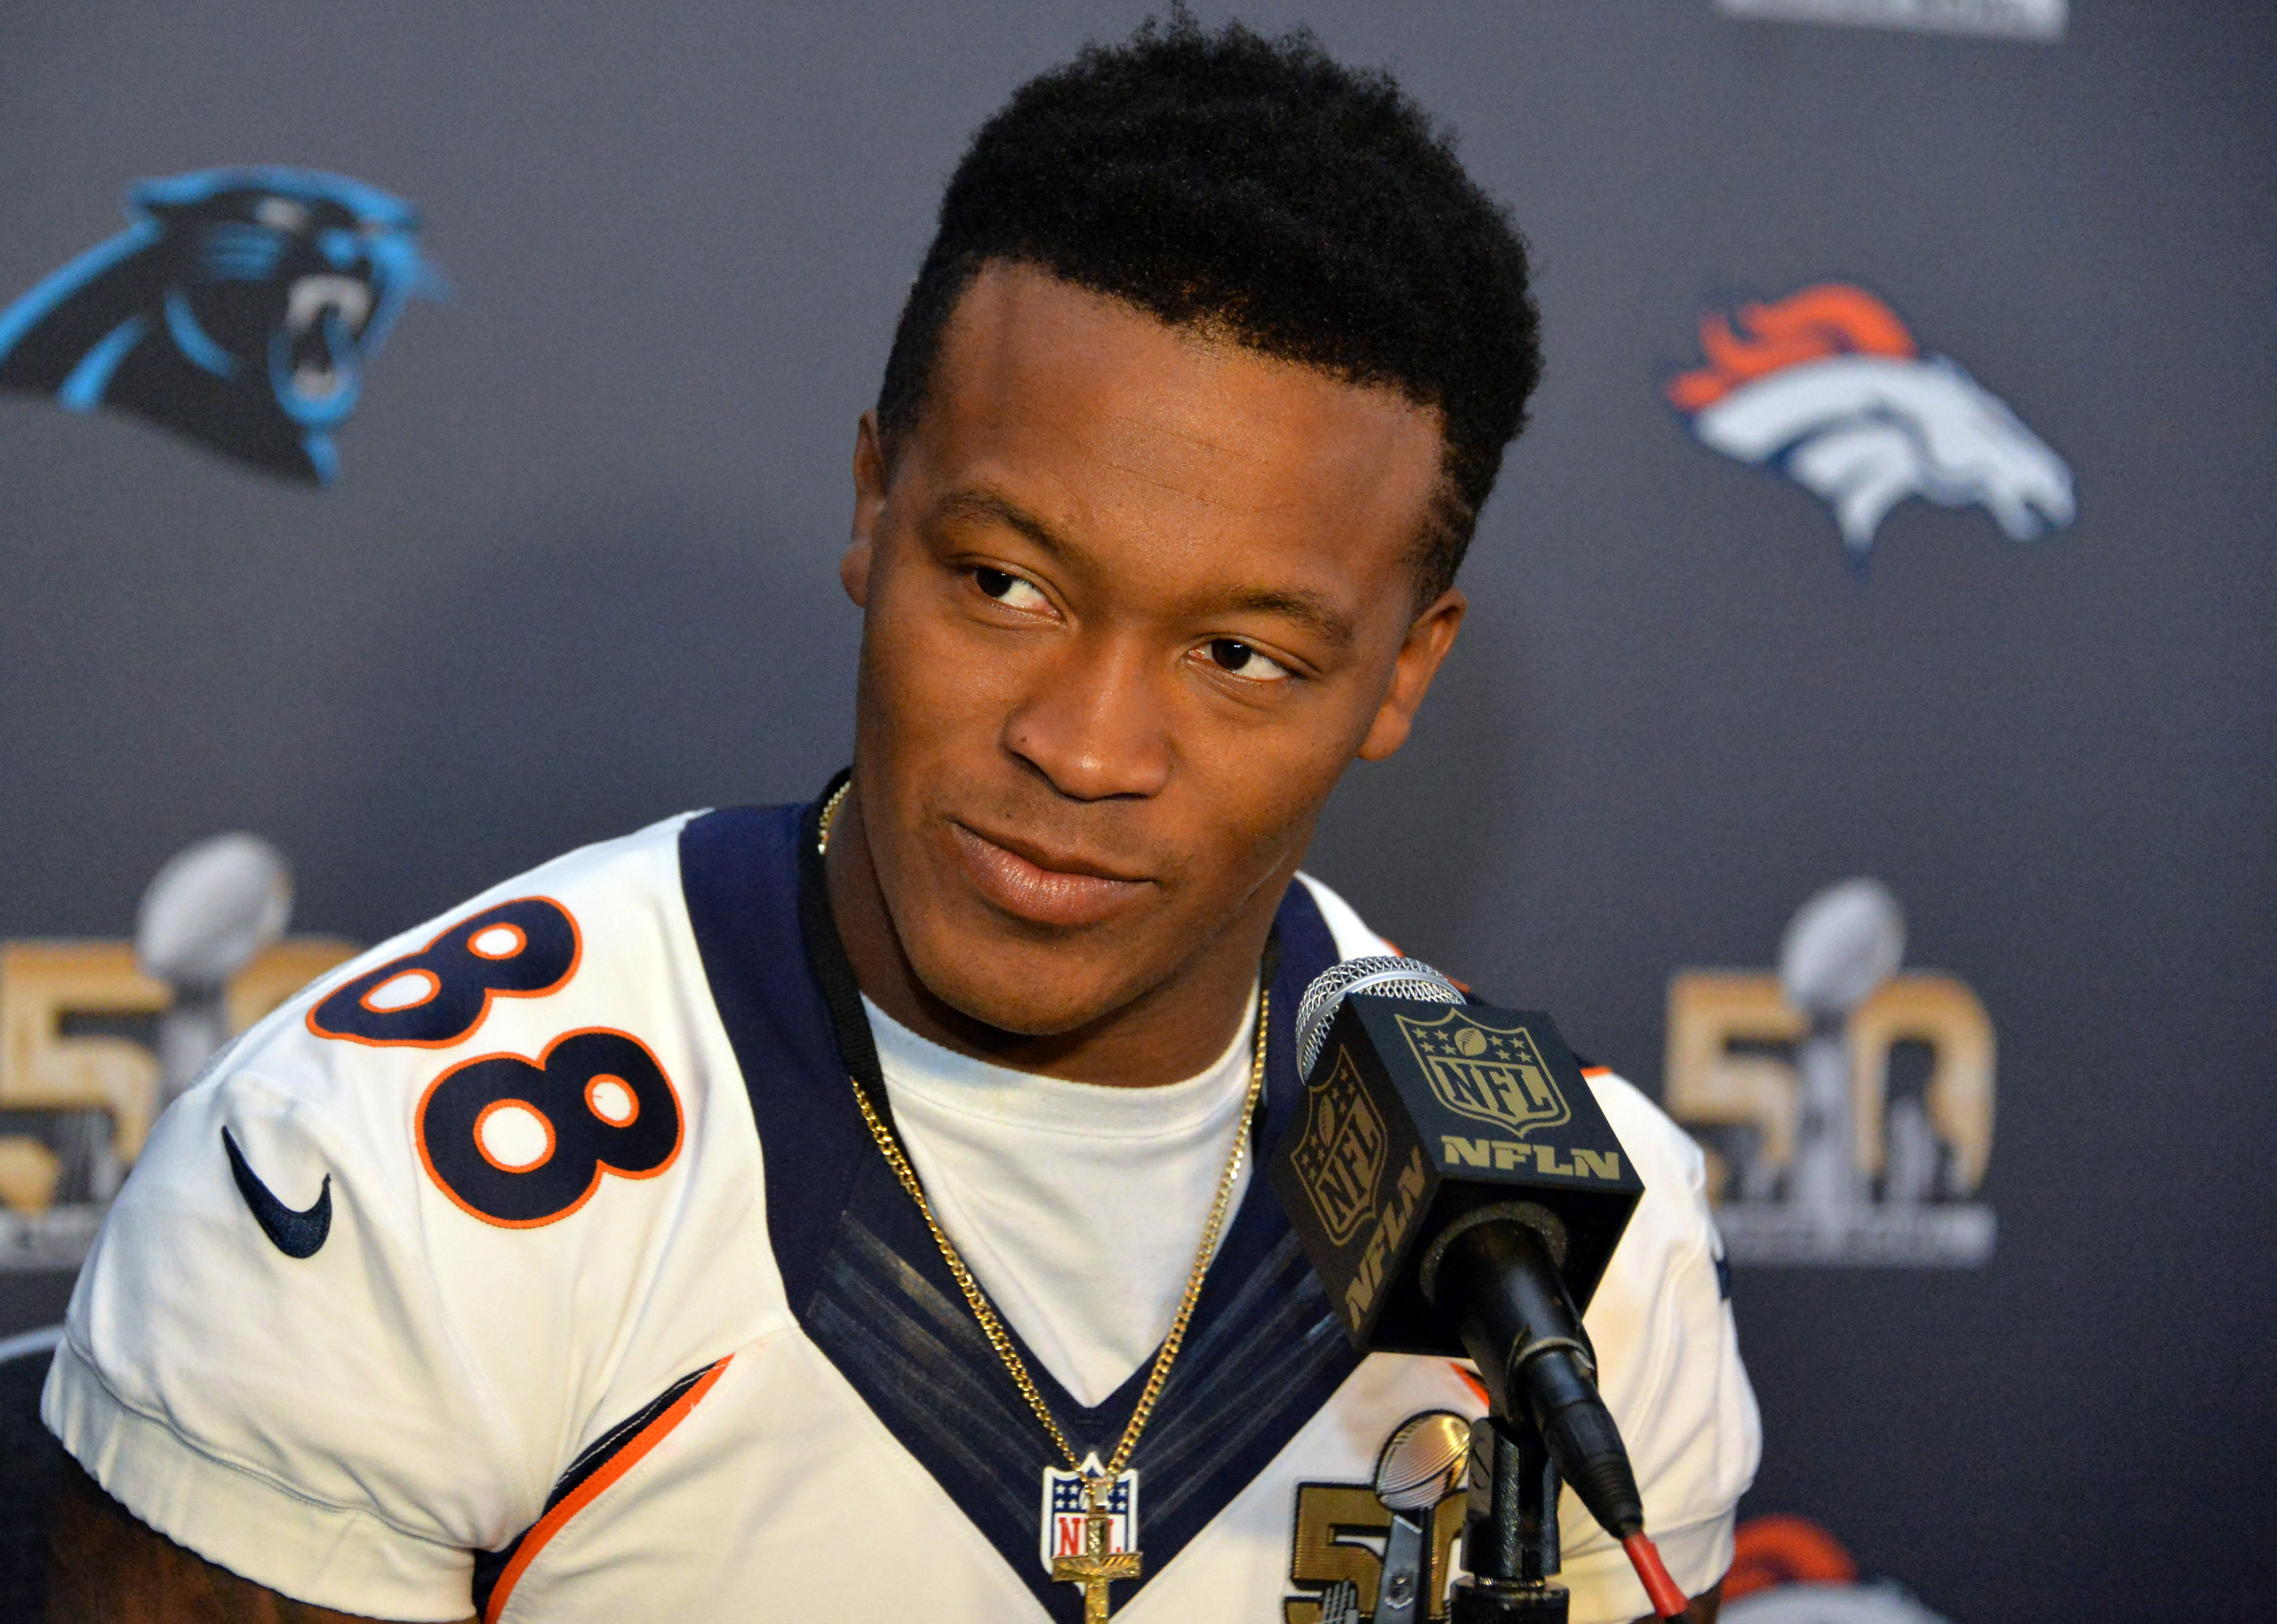 Broncos plan tributes for WR Demaryius Thomas at Mile High Sunday